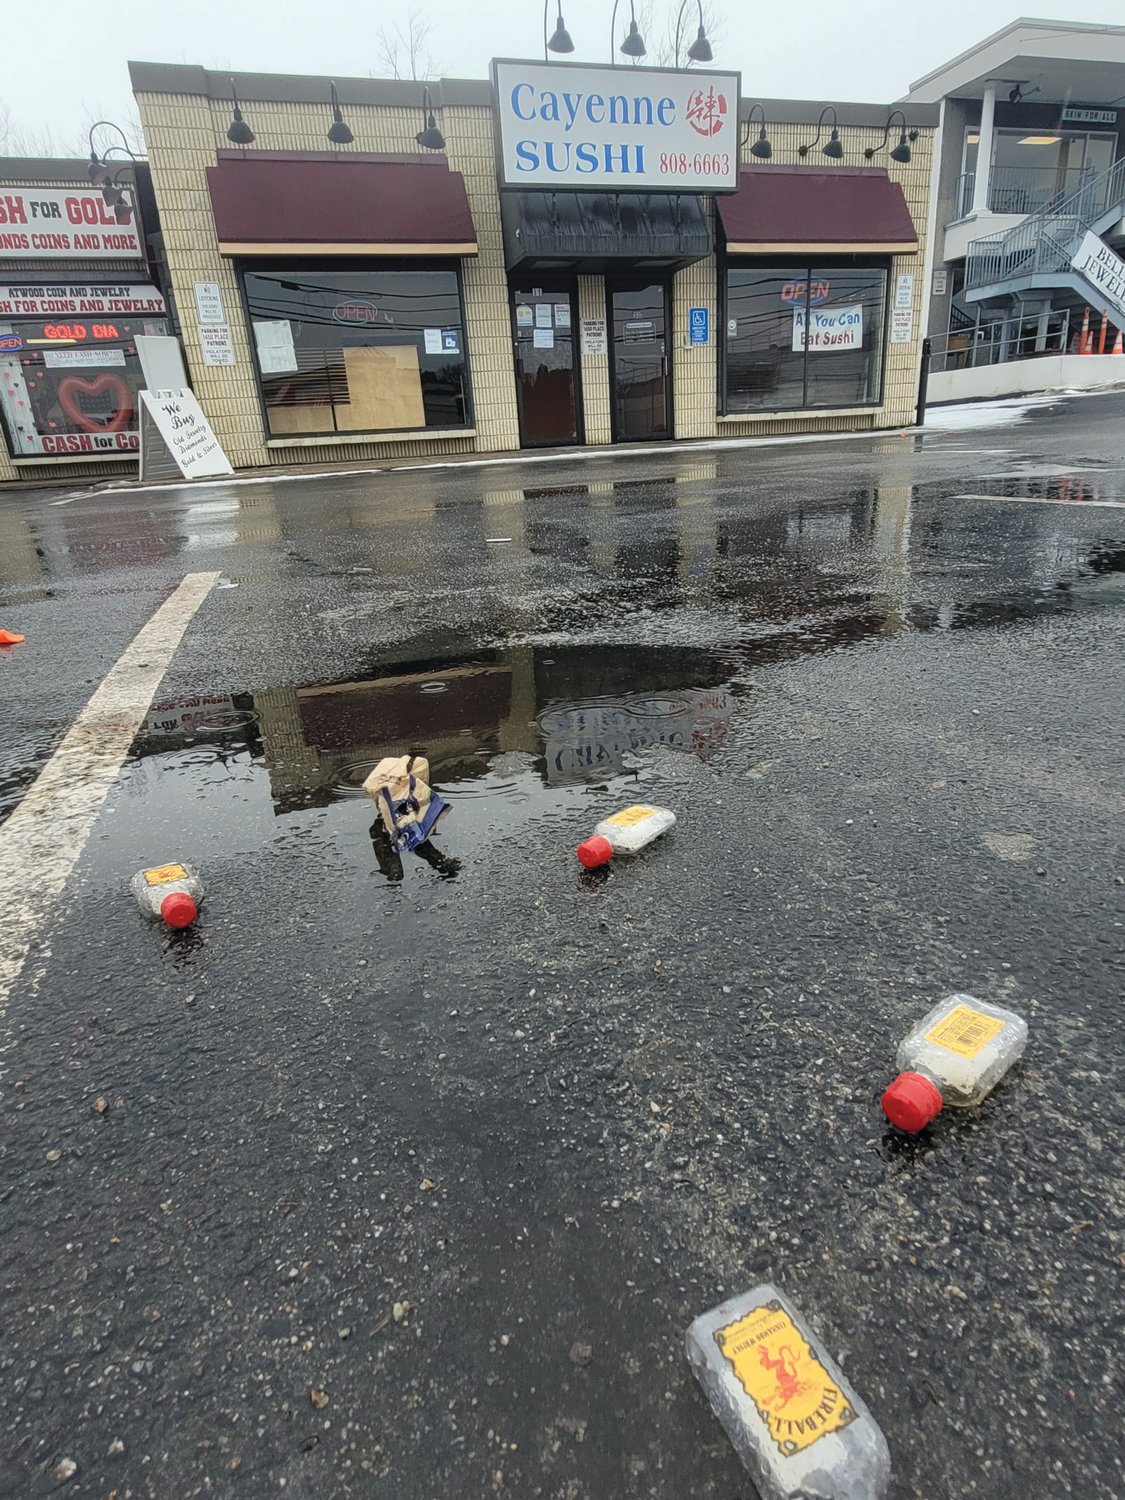 FIREBALL LITTER: Four freshly dropped nips litter the parking lot outside Cayenne Sushi on Atwood Avenue in Johnston. The snow had been plowed recently, so the bottles were carelessly tossed recently.